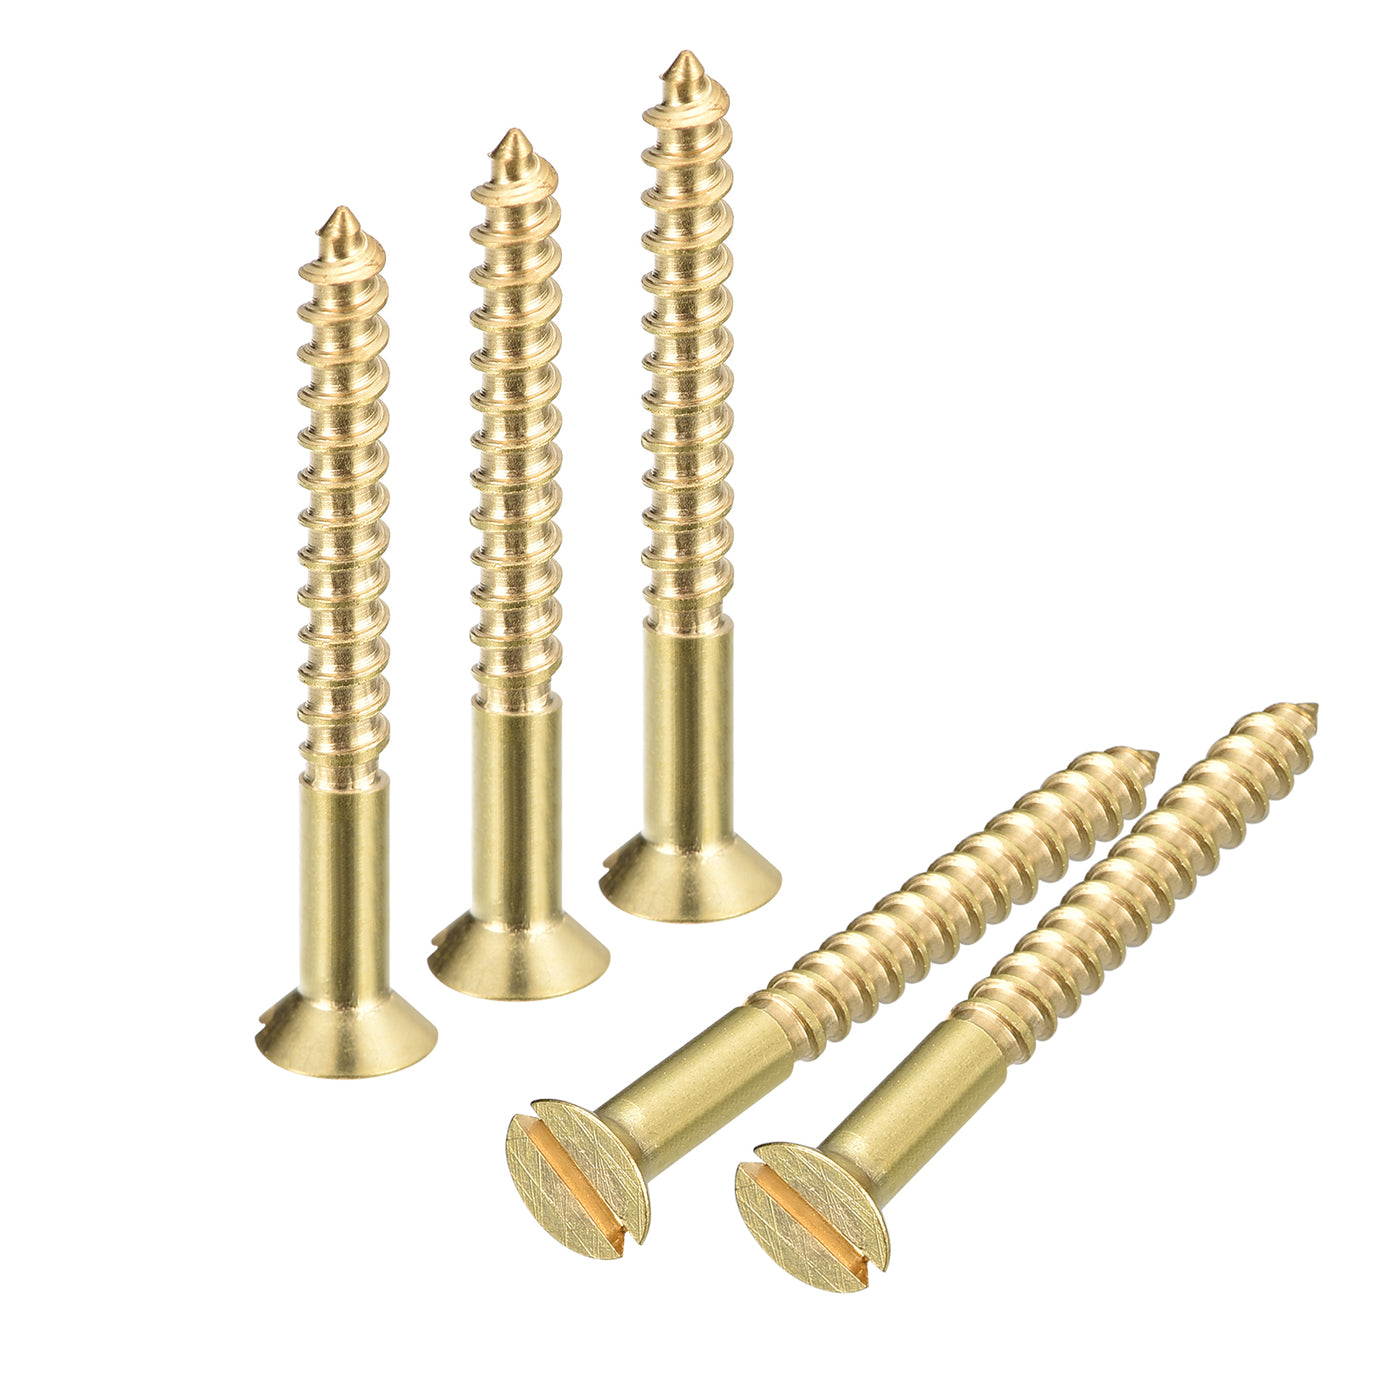 uxcell Uxcell 100Pcs M3 x 30mm Brass Slotted Drive Flat Head Wood Screws Self Tapping Screw